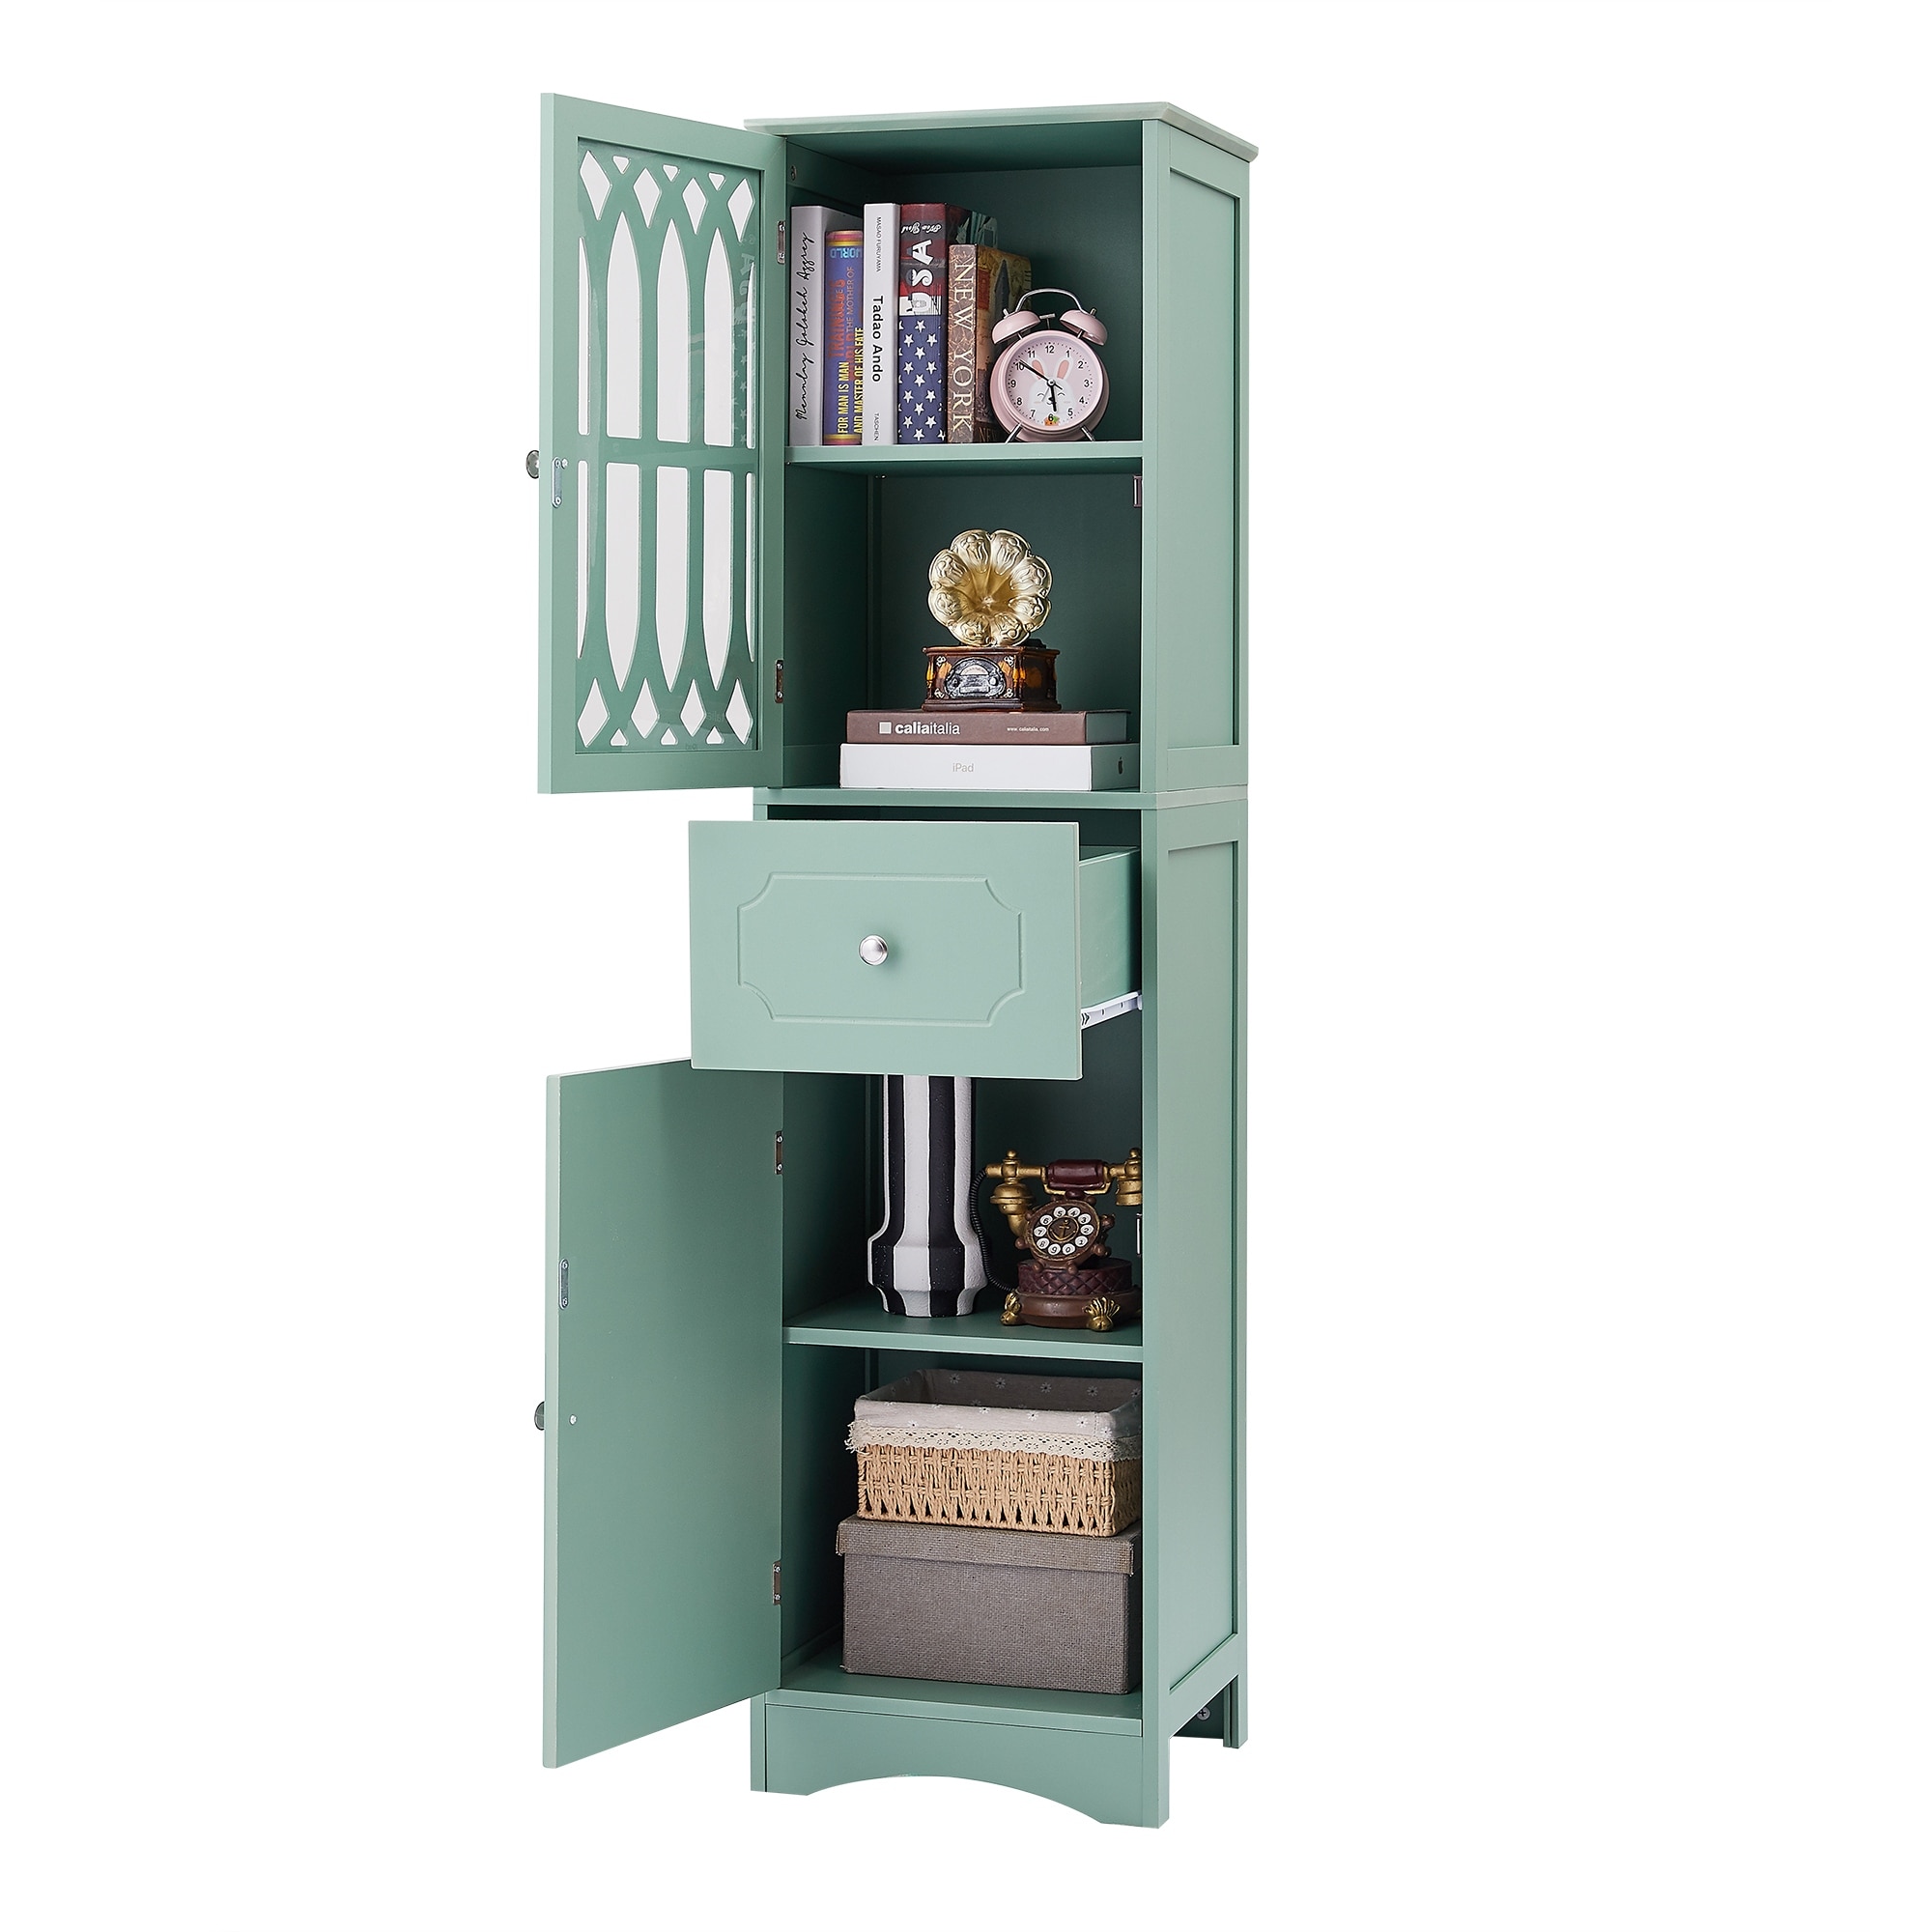 Dropship Tall Bathroom Cabinet, Freestanding Storage Cabinet With Drawer,  MDF Board, Adjustable Shelf, Green to Sell Online at a Lower Price